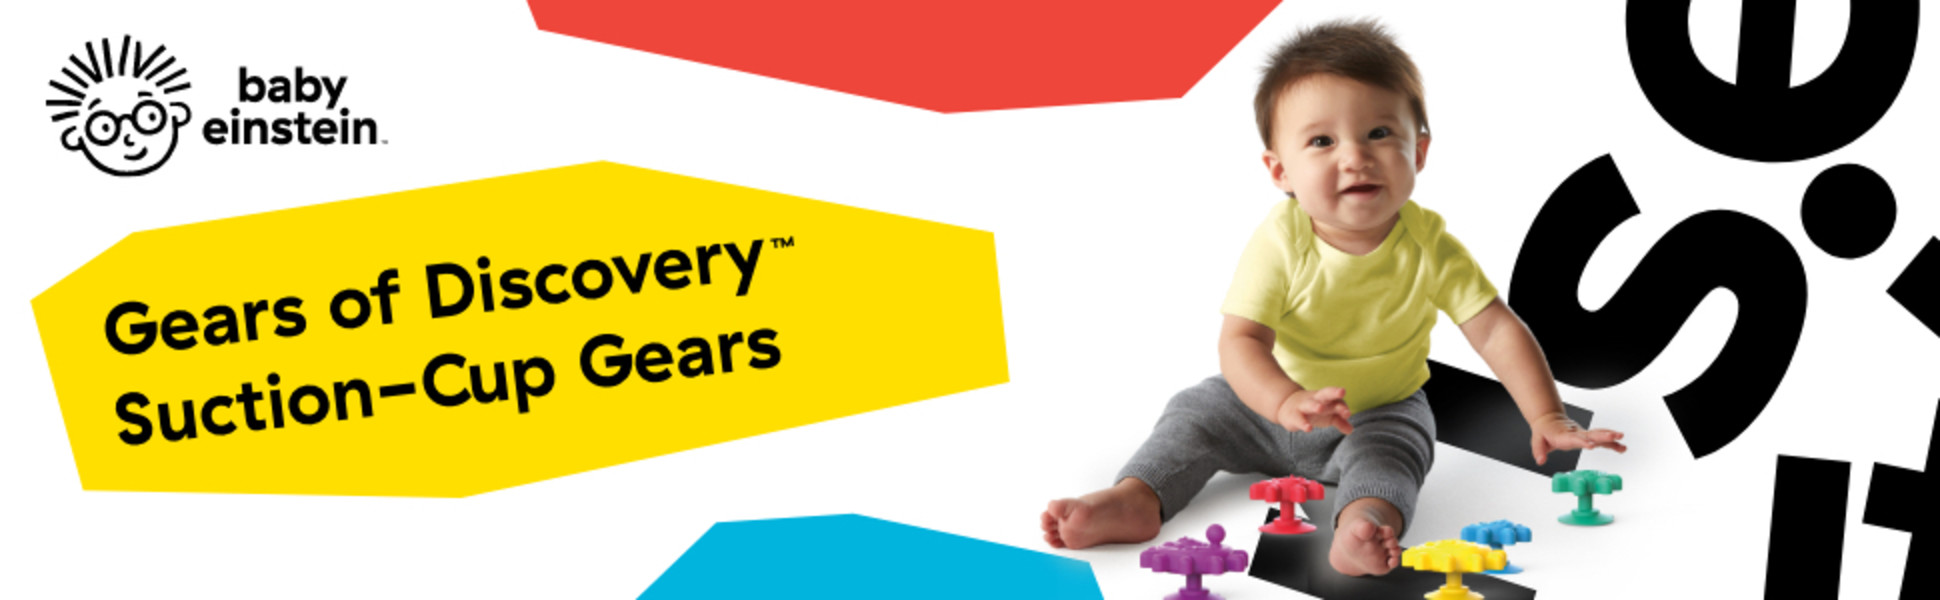 Baby Einstein - Baby, Infant Toddler - Gears of Discovery™ Suction